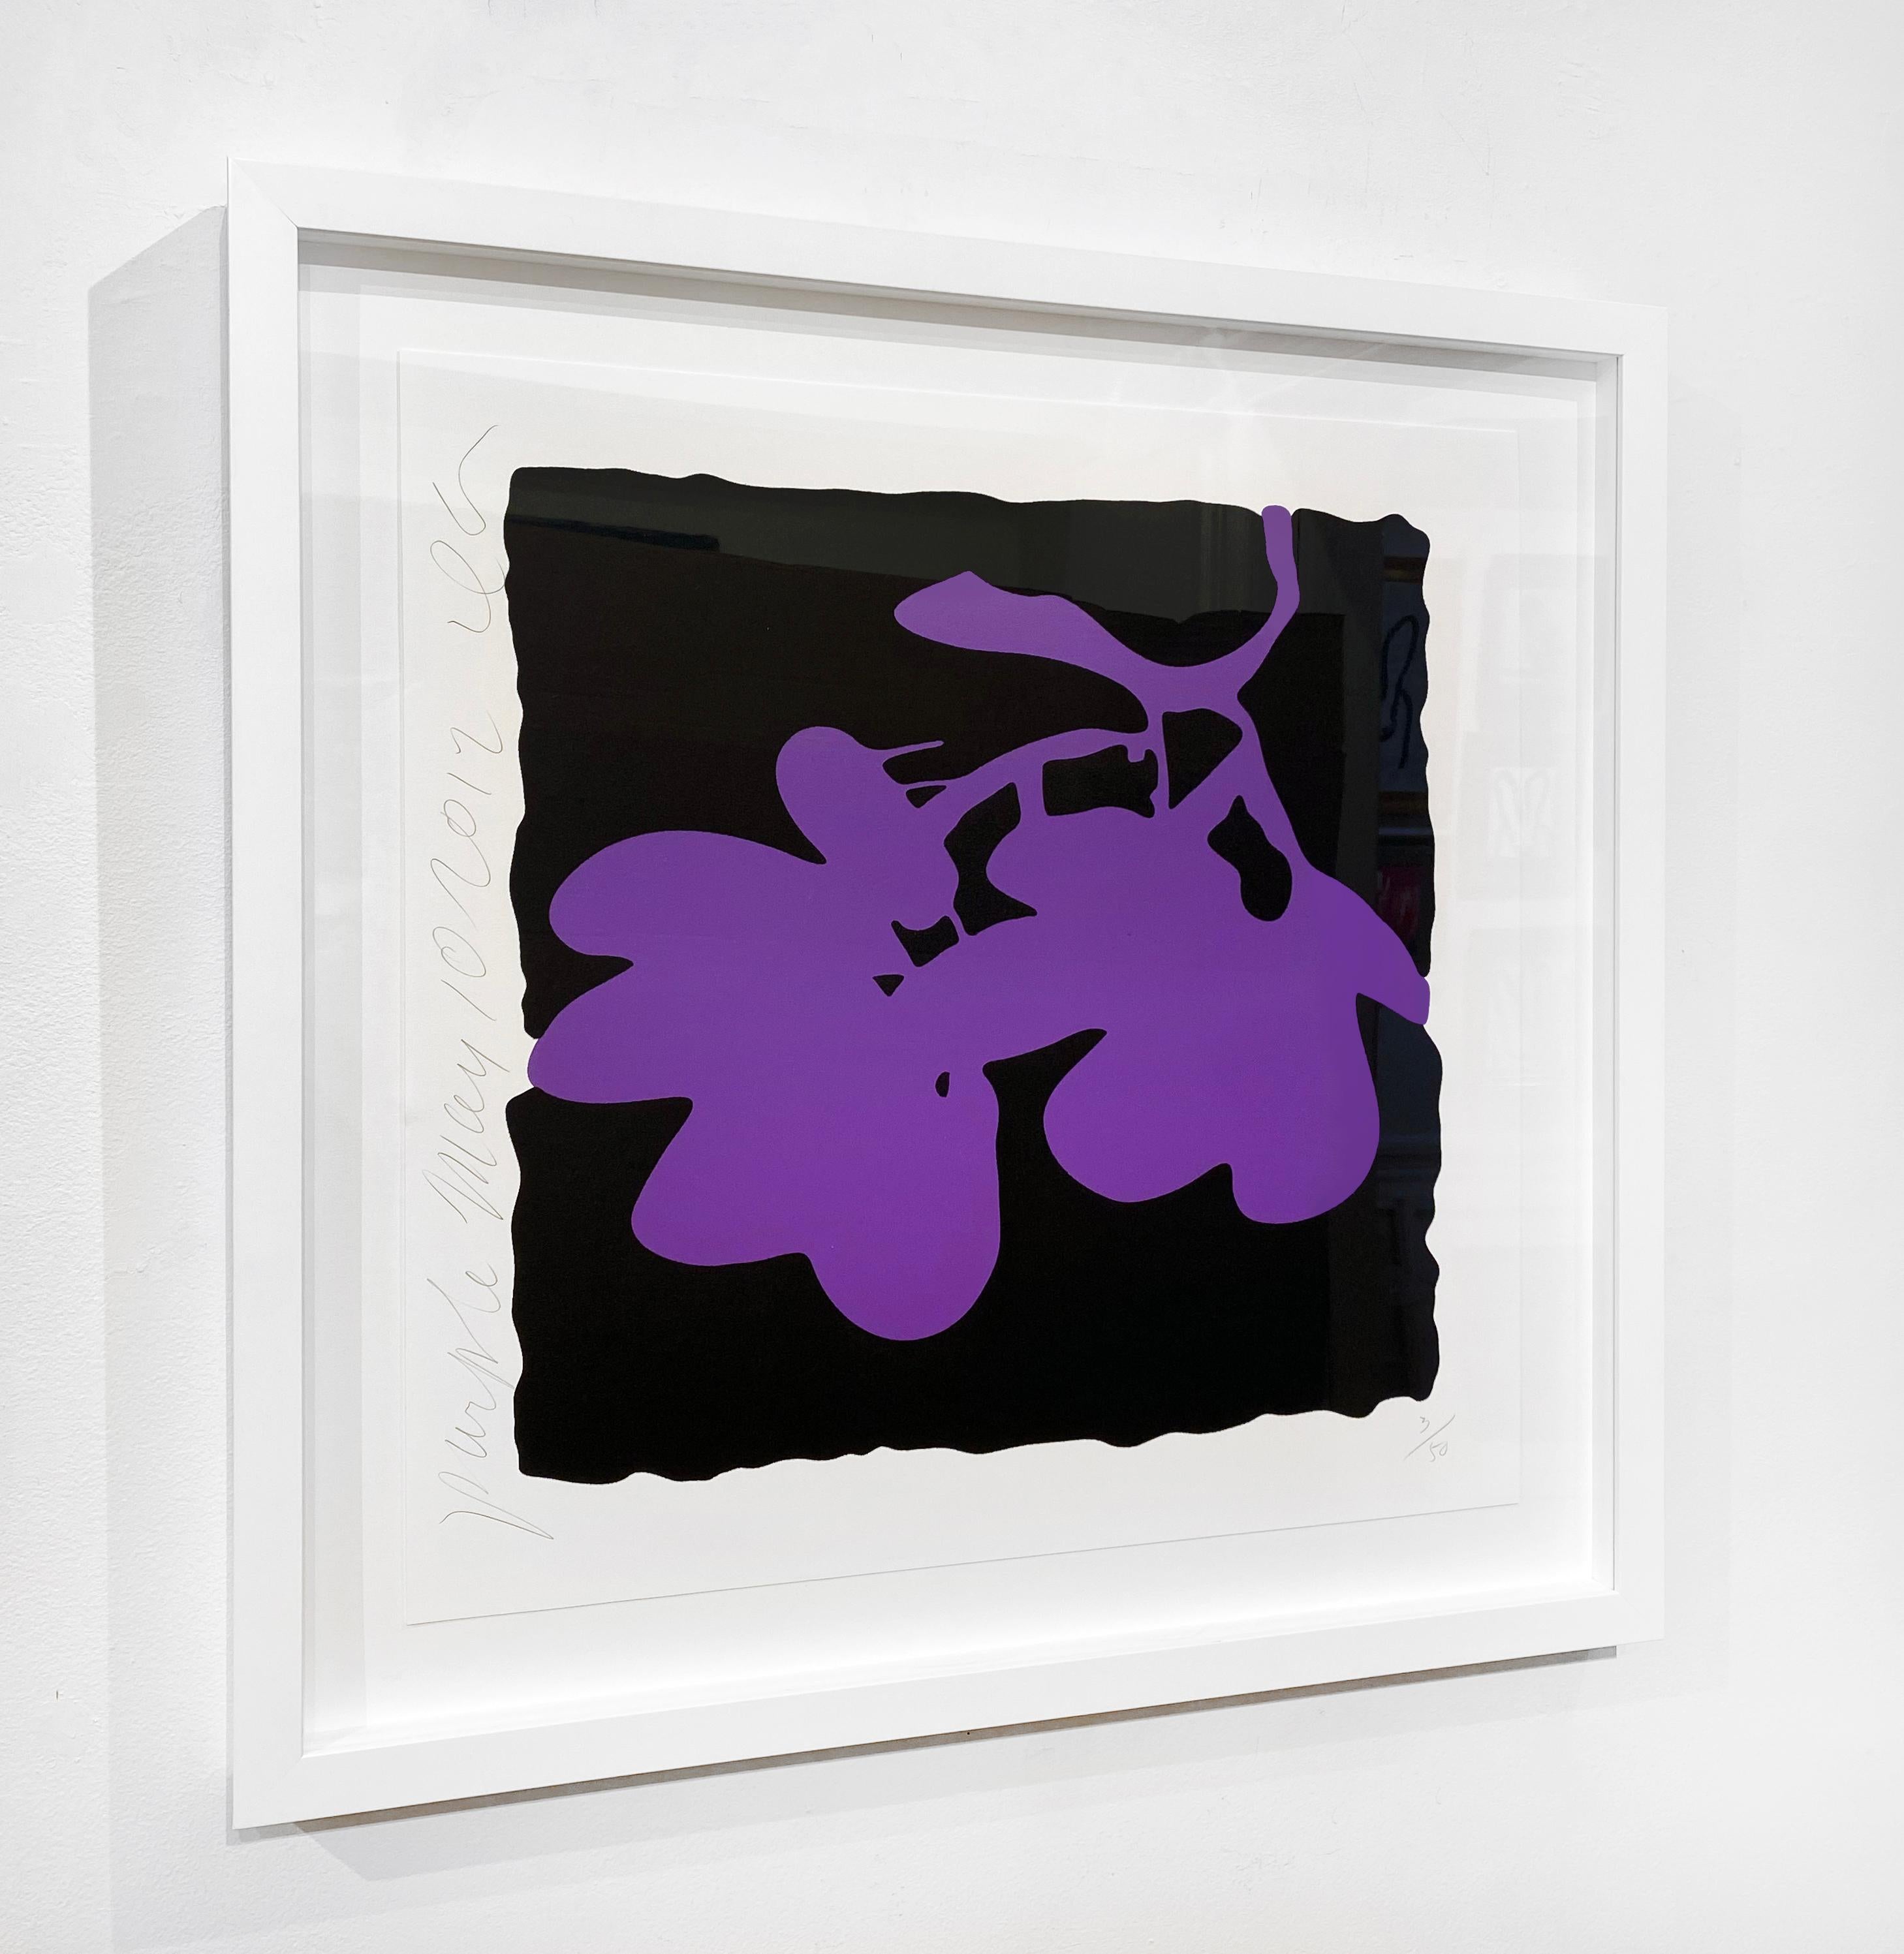 Artist:  Sultan, Donald
Title:  Lantern Flowers, May 10, 2012 - Purple
Series:  Lantern Flowers, May 10, 2012
Date:  2012
Medium:  Color silkscreen with over-printed flocking on Rising, 4 ply museum board
Unframed Dimensions:  24